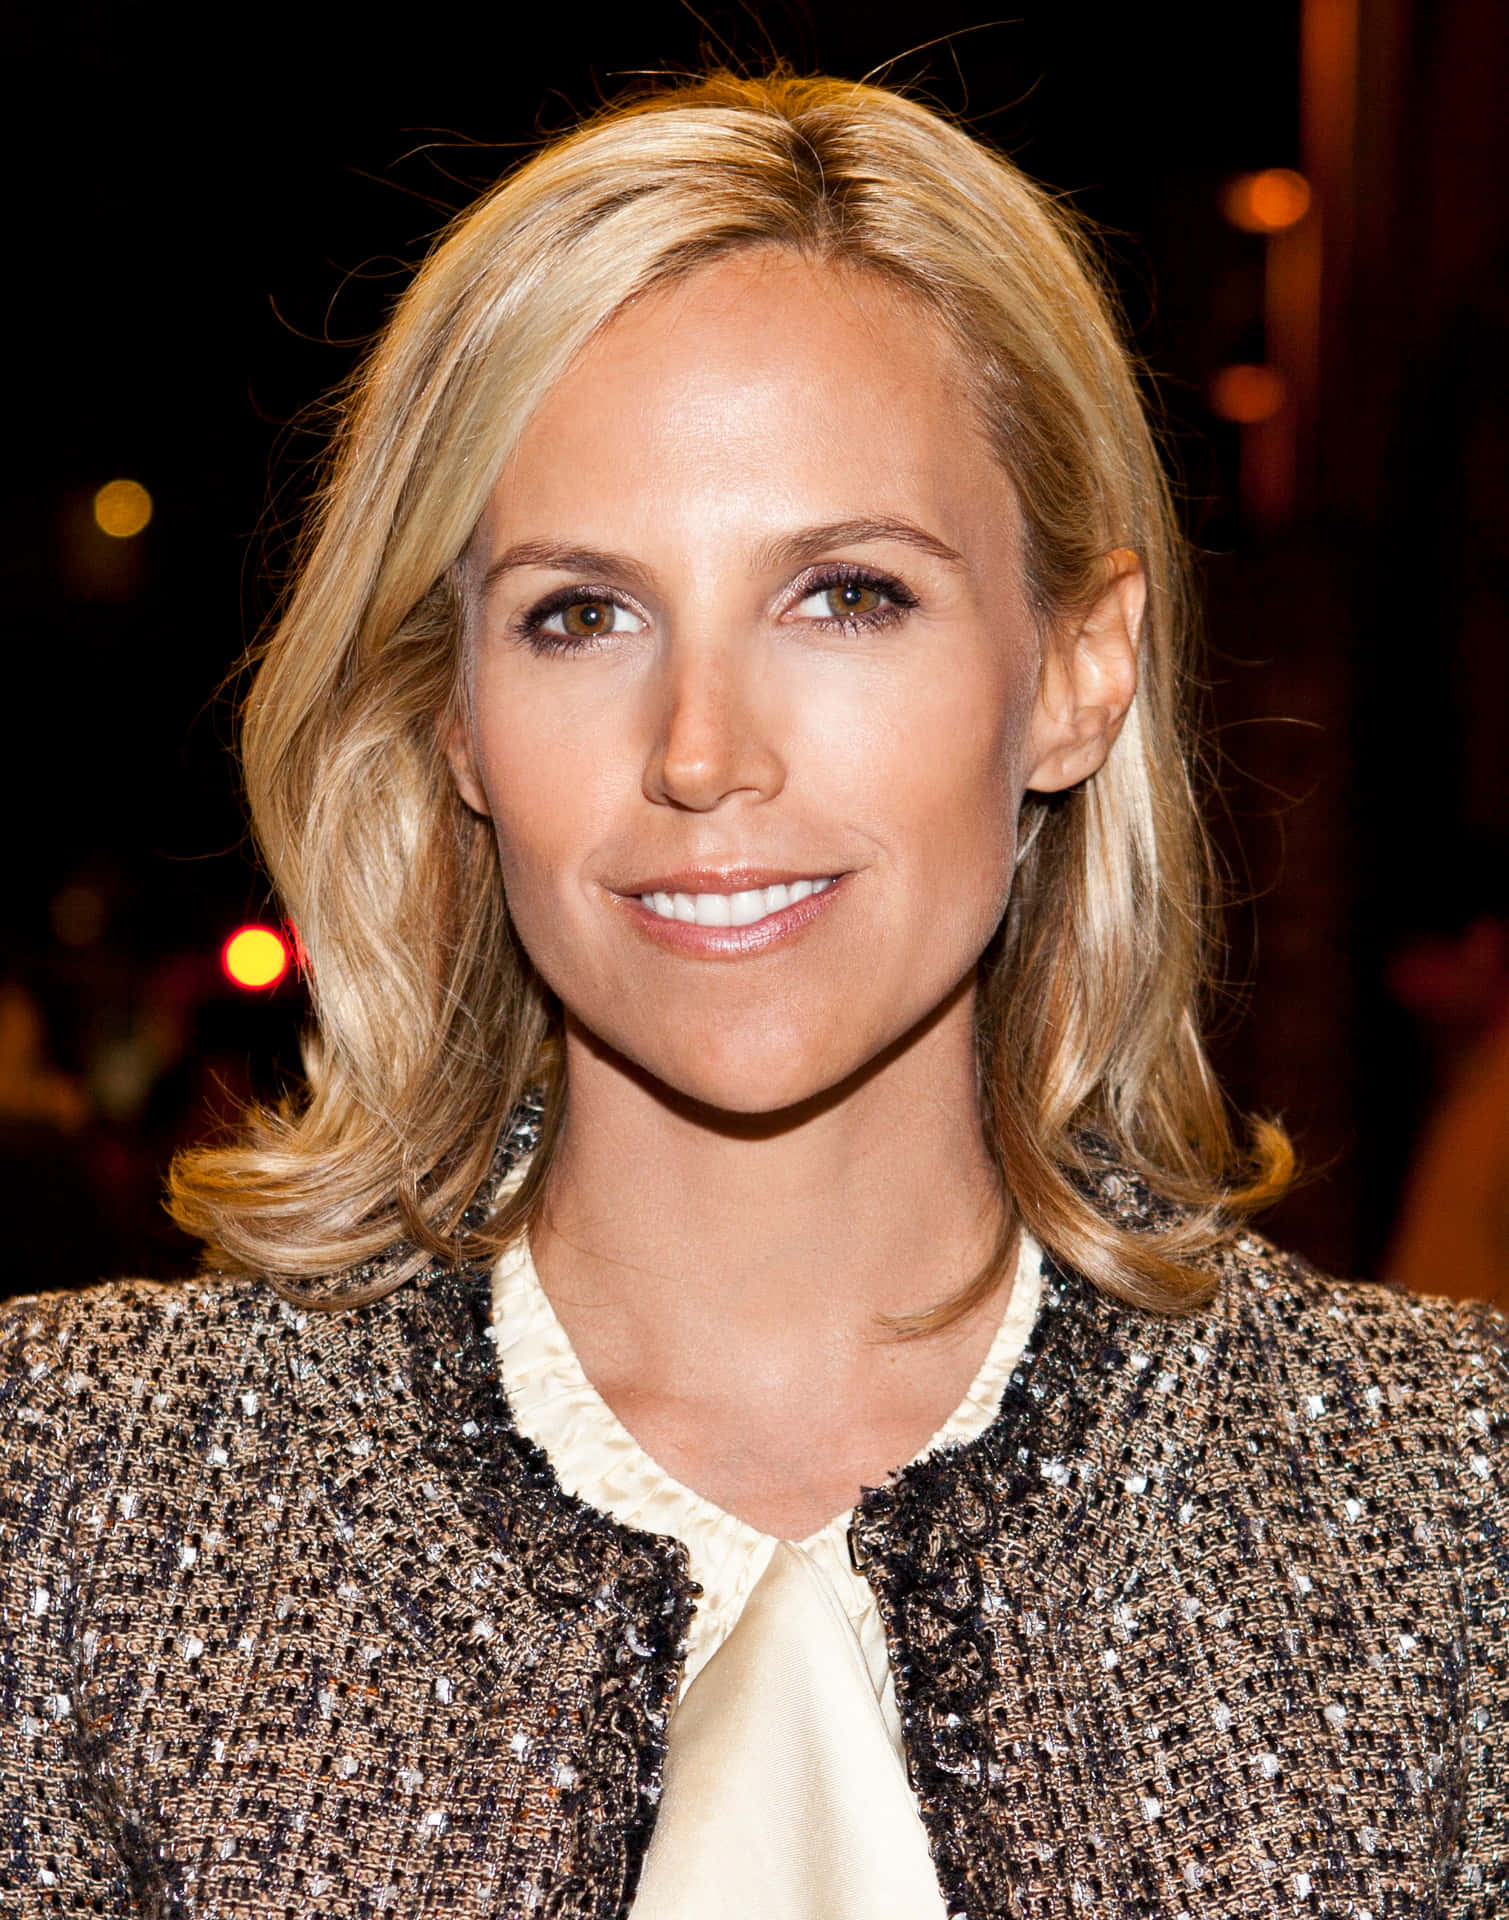 The iconic designer Tory Burch in her chic summer clothing collection